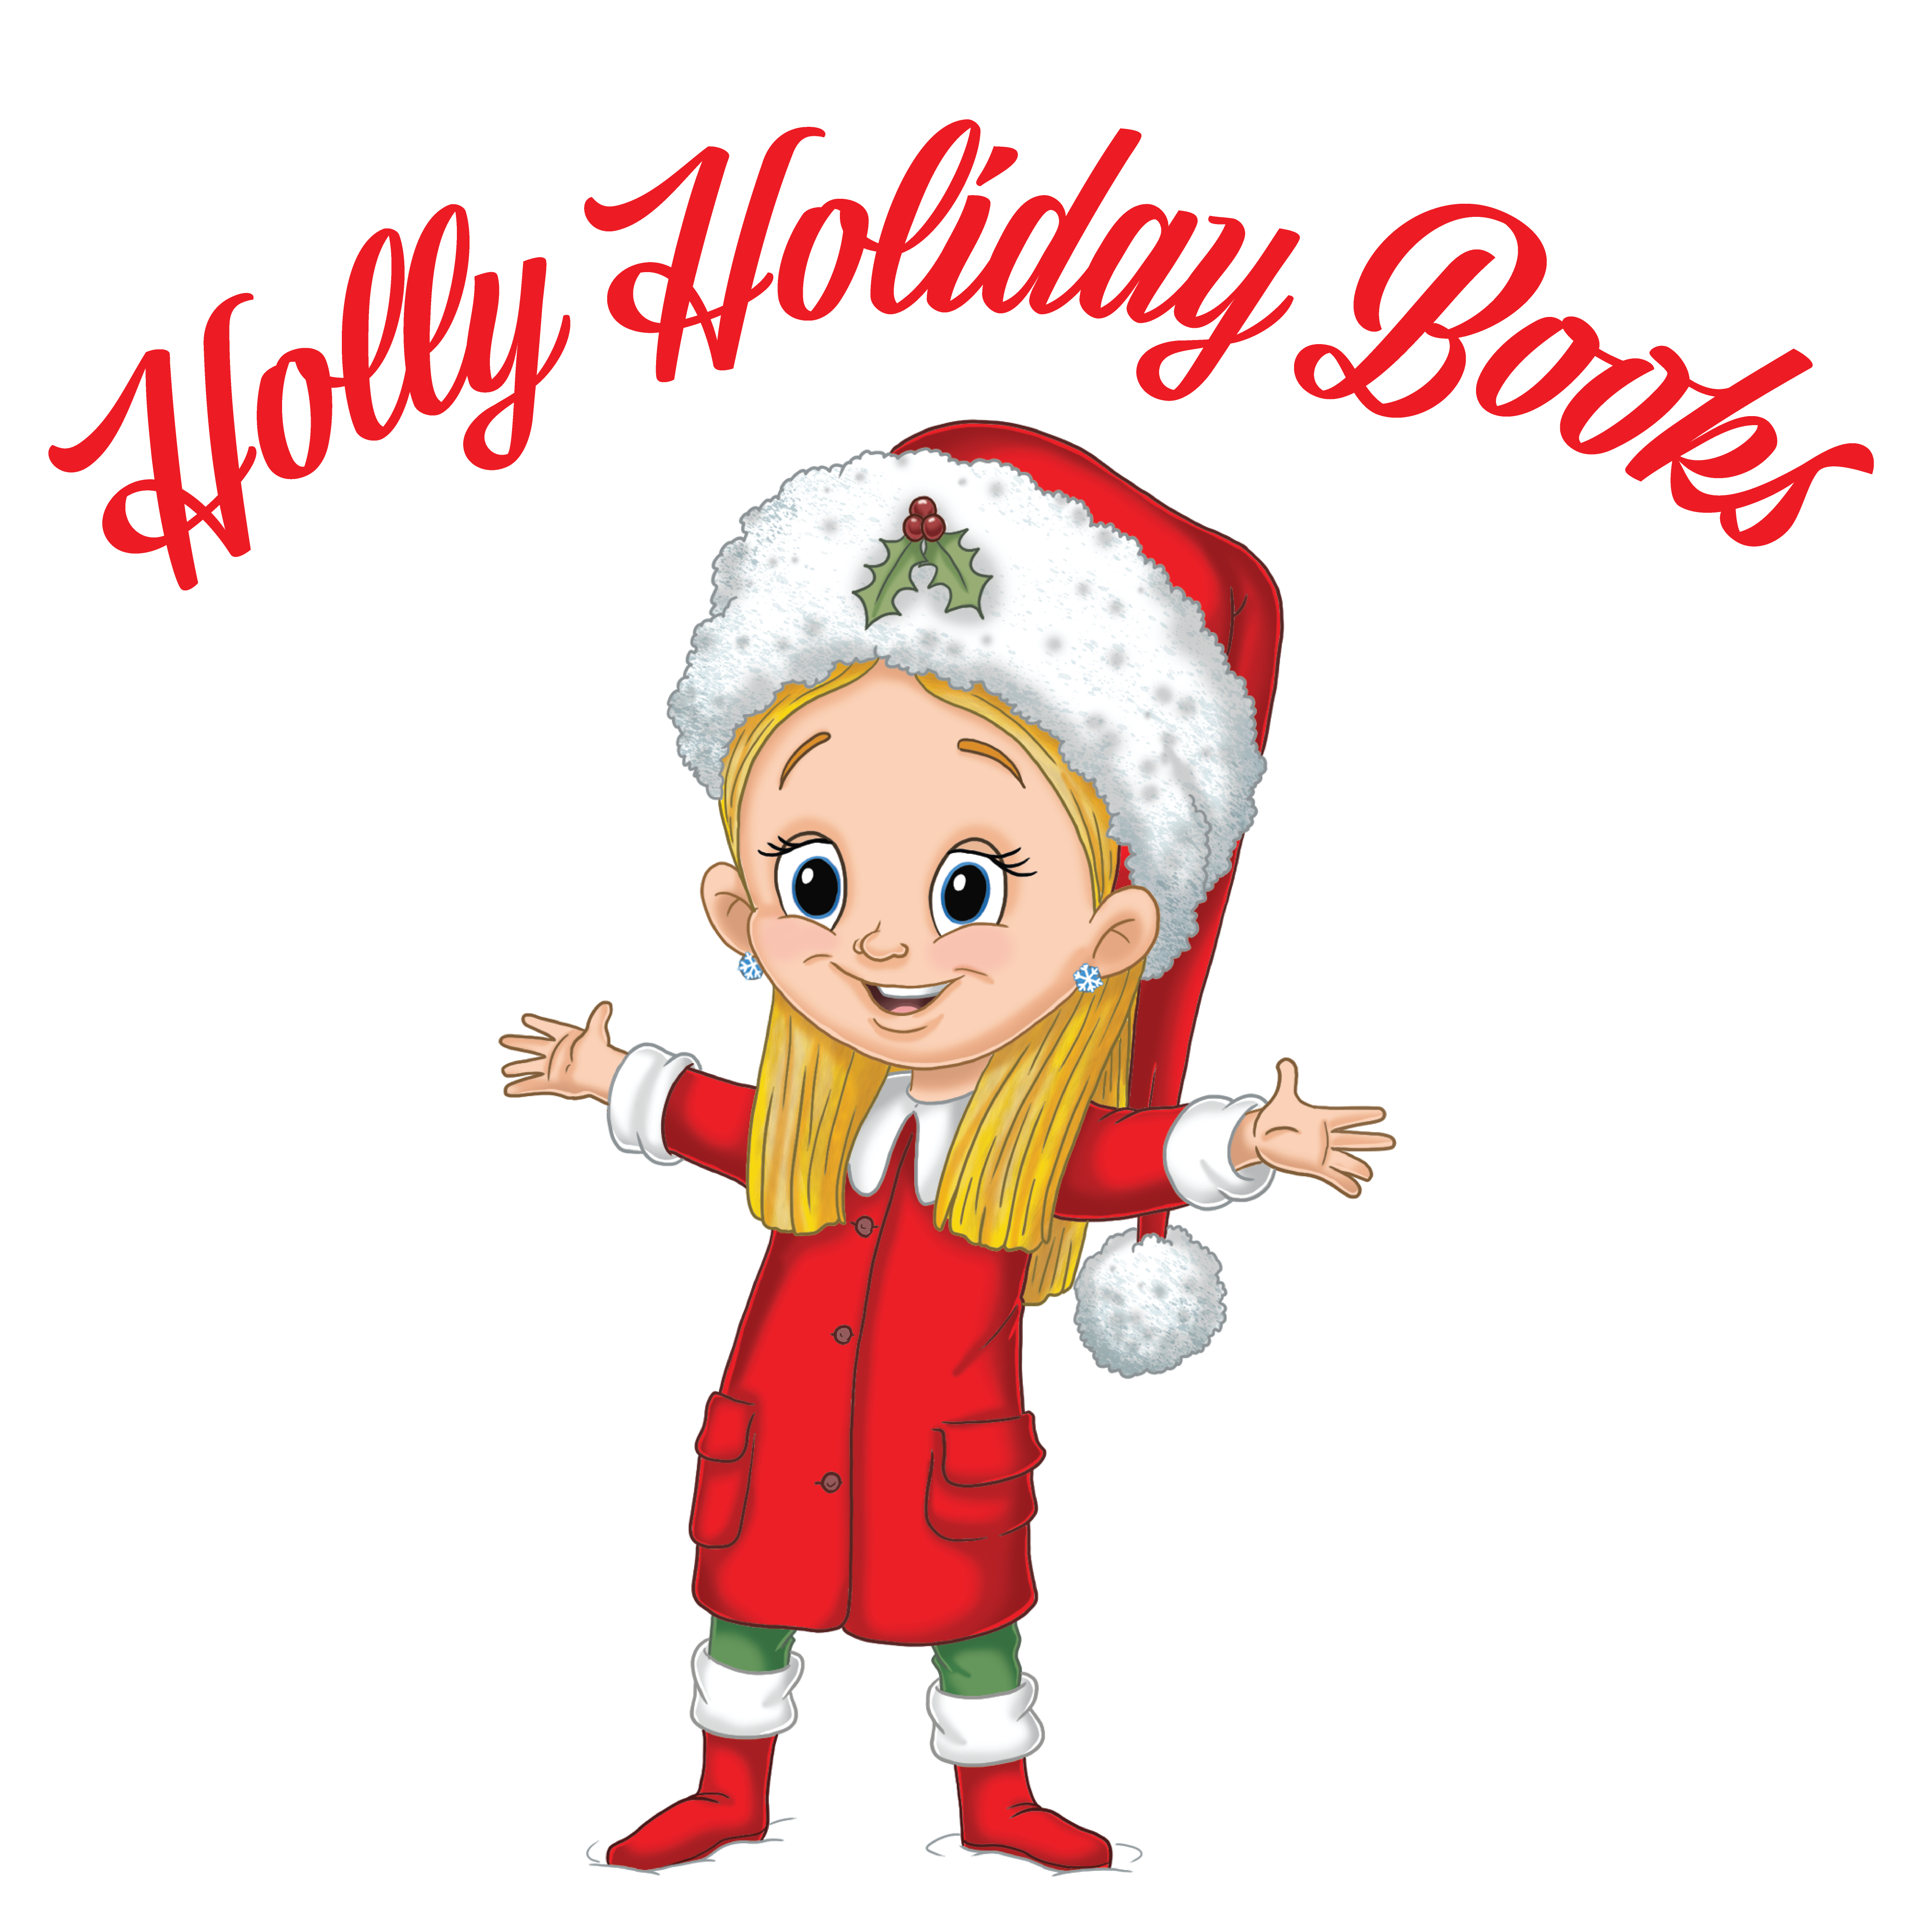 Holly Holiday Books